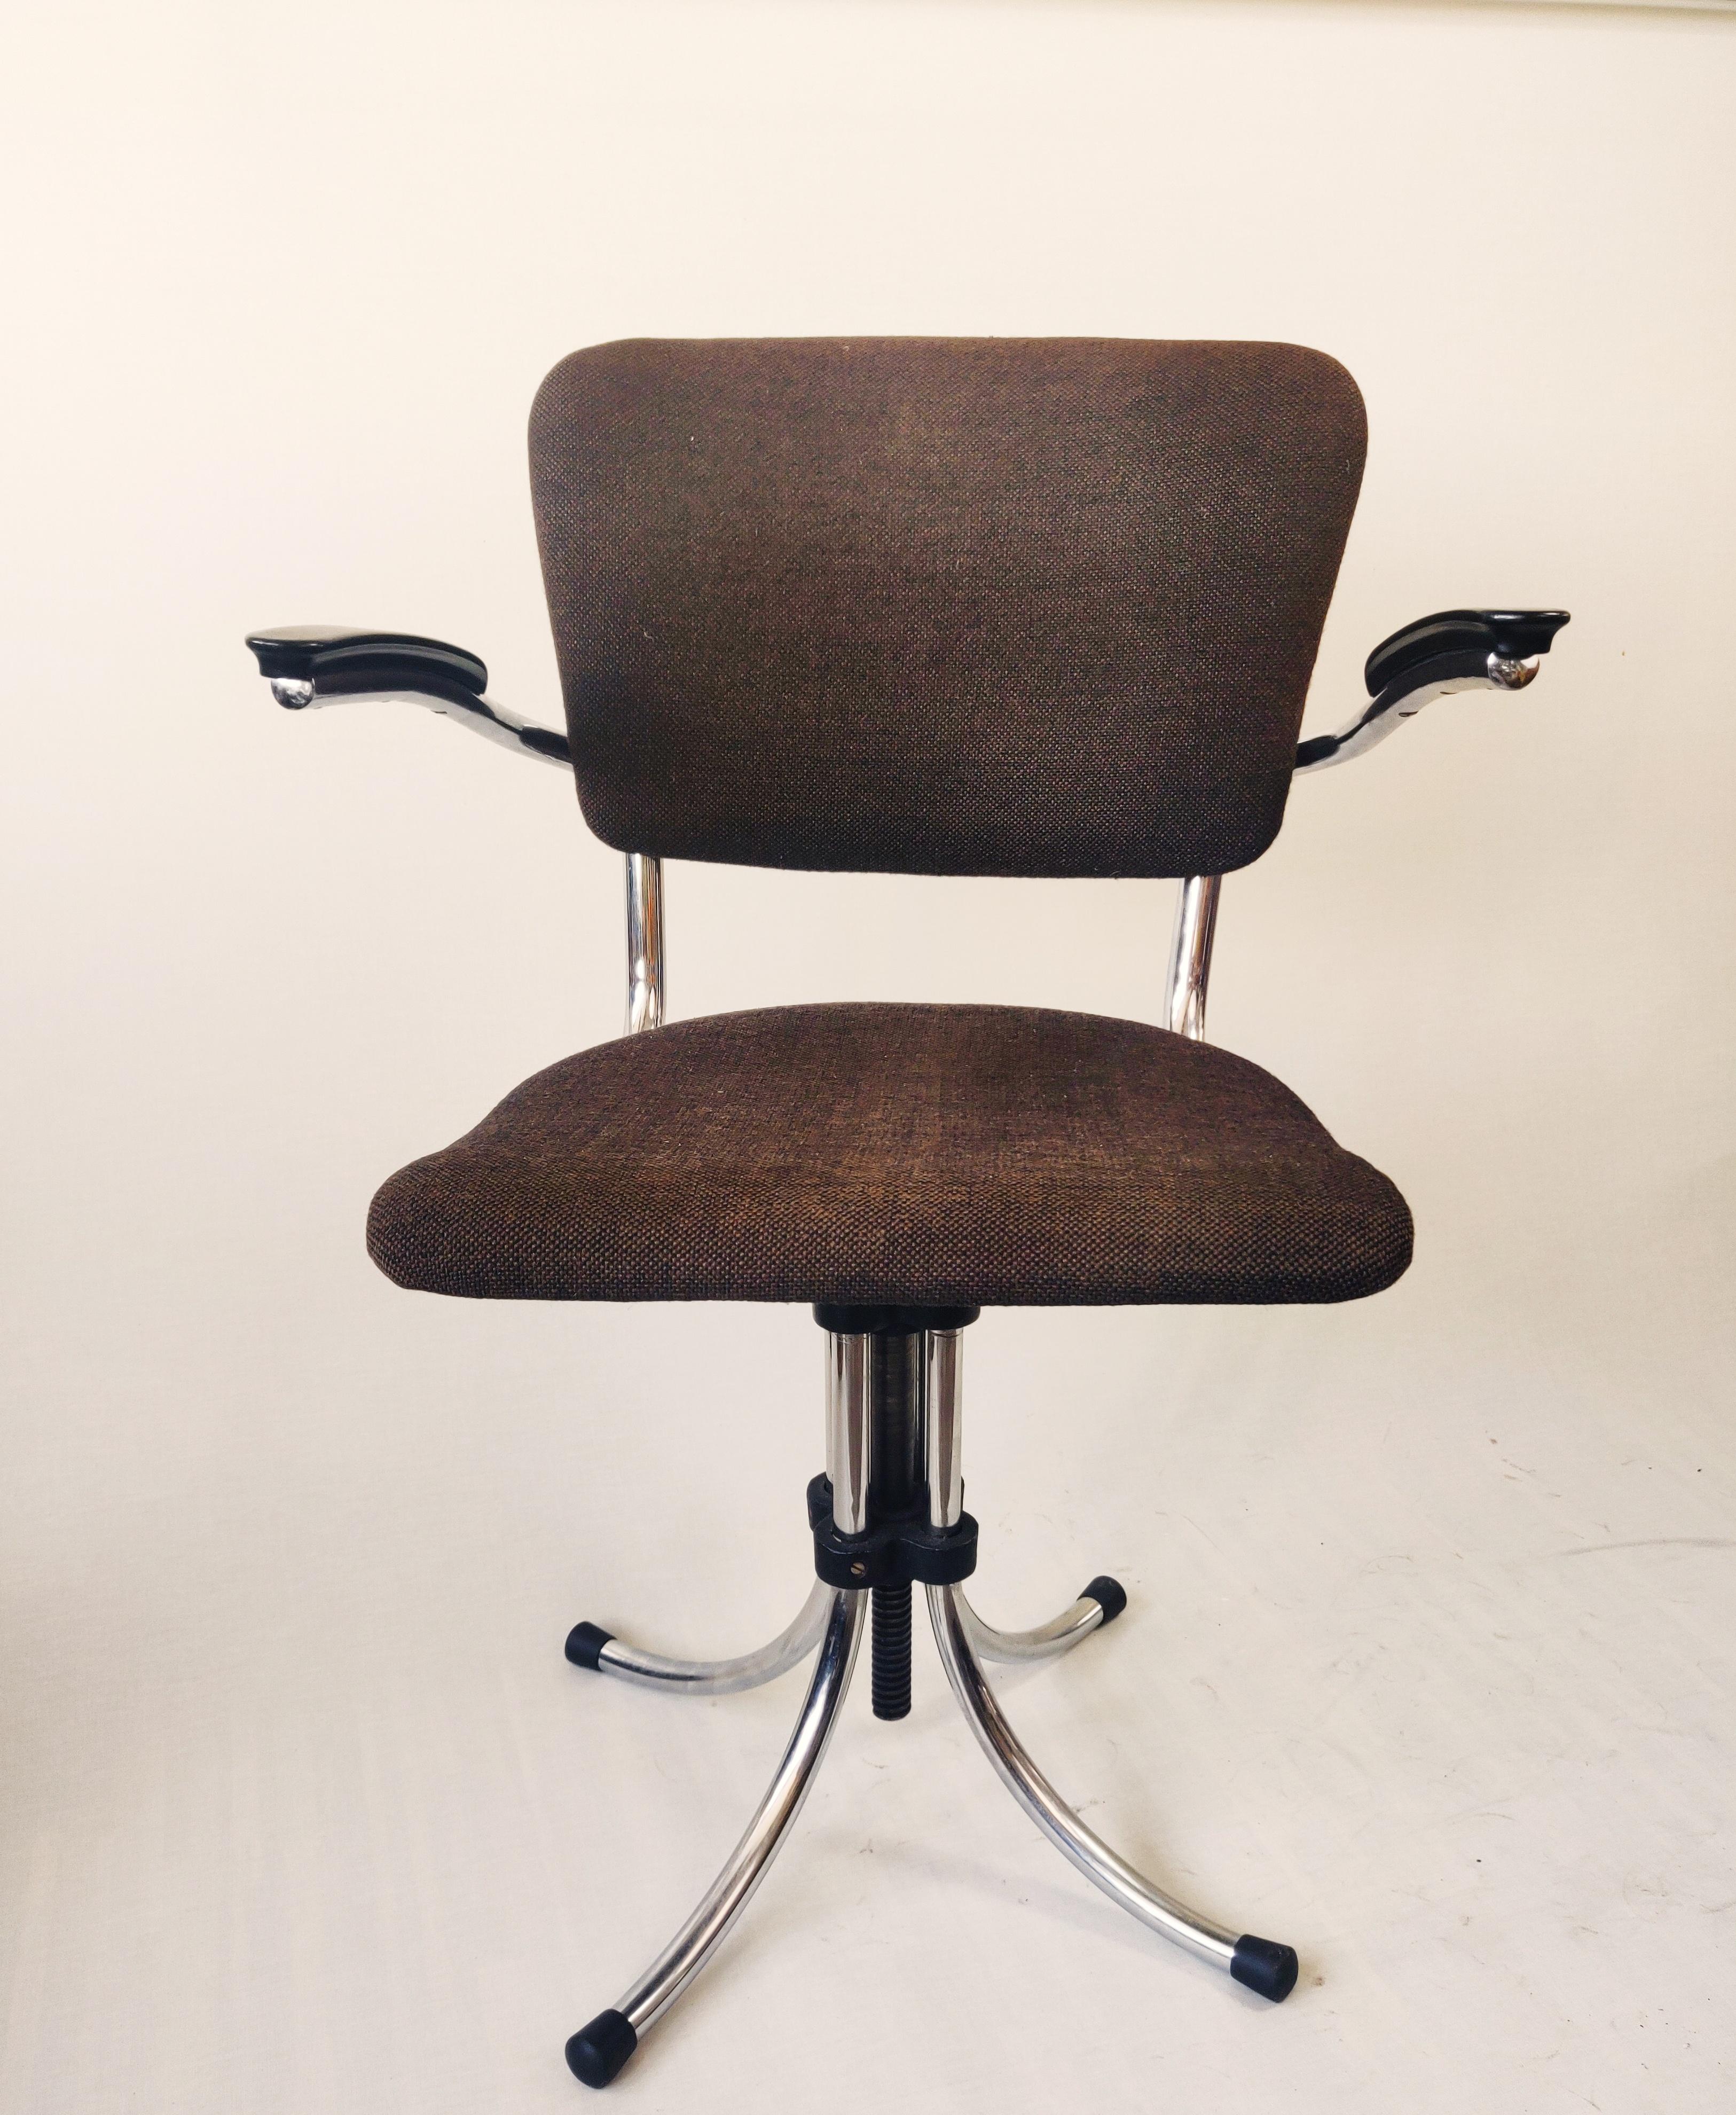 Rare office chair by Fana Metaal Rotterdam, designed by Paul Schuitema in the 1960s. The chair has a tubular frame base, bakelite armrests and brown fabric back and seat. . Patina on the tube frame. The chair is height adjustable and swivels. 